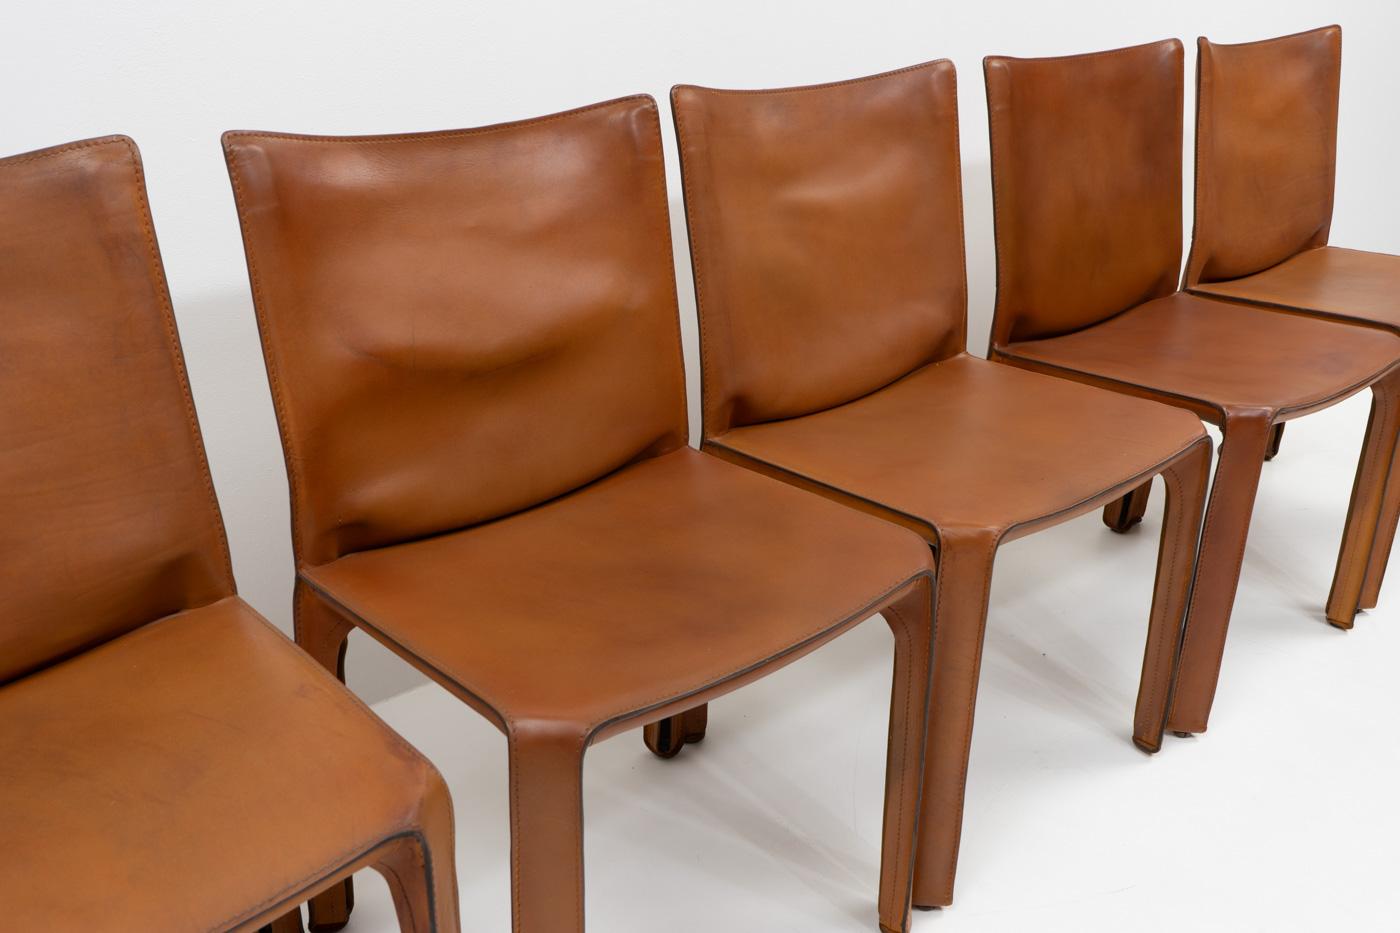 Italian Design Classic Cab 412 Chairs by Mario Bellini for Cassina, Set of Six 1